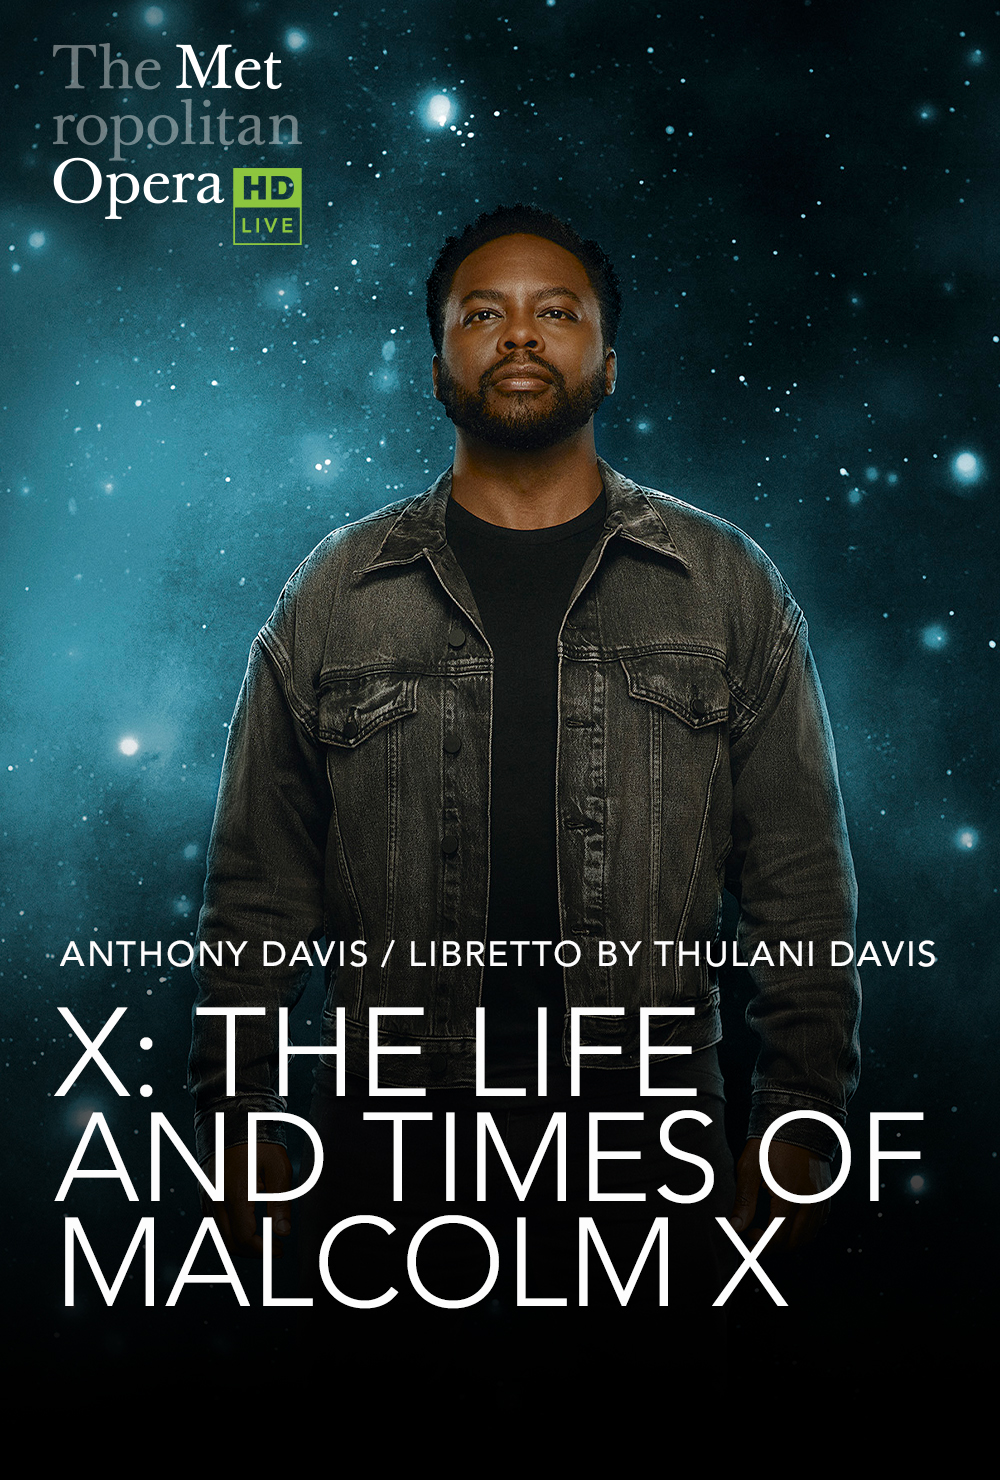 The Met: Live in HD 2023–24 season continues with live transmission of Anthony Davis’s groundbreaking opera  X: The Life and Times of Malcolm X  to cinemas nationwide on Saturday, November 18, presented by Fathom Events